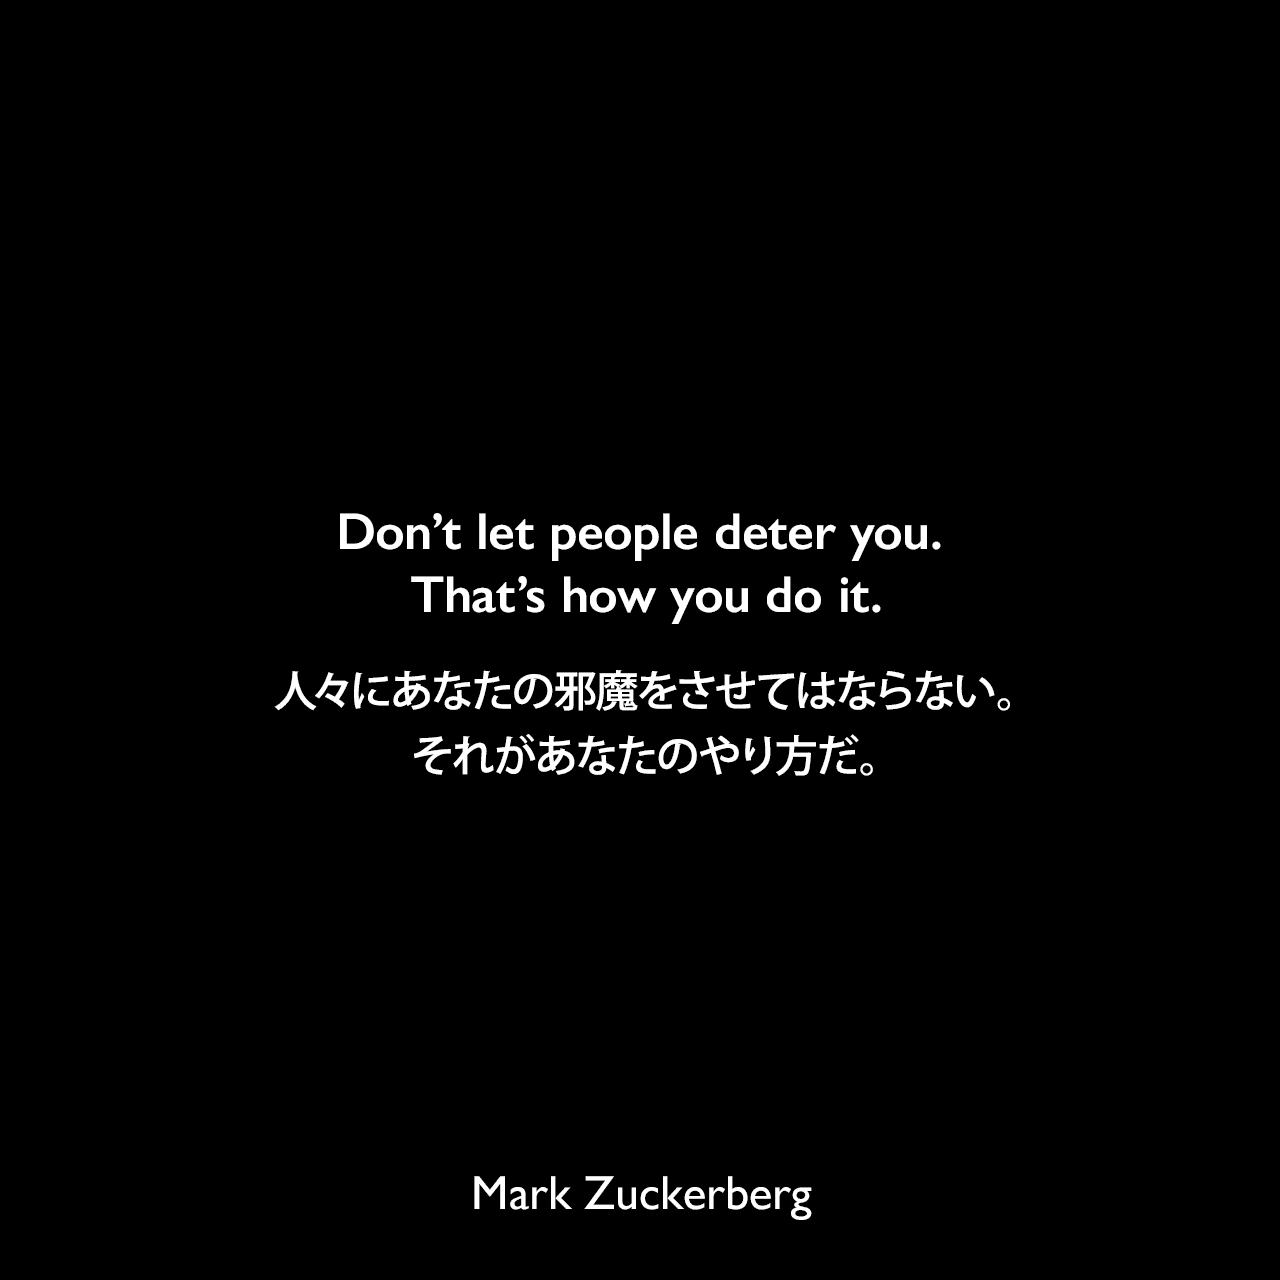 Don’t let people deter you. That’s how you do it.人々にあなたの邪魔をさせてはならない。それがあなたのやり方だ。Mark Zuckerberg